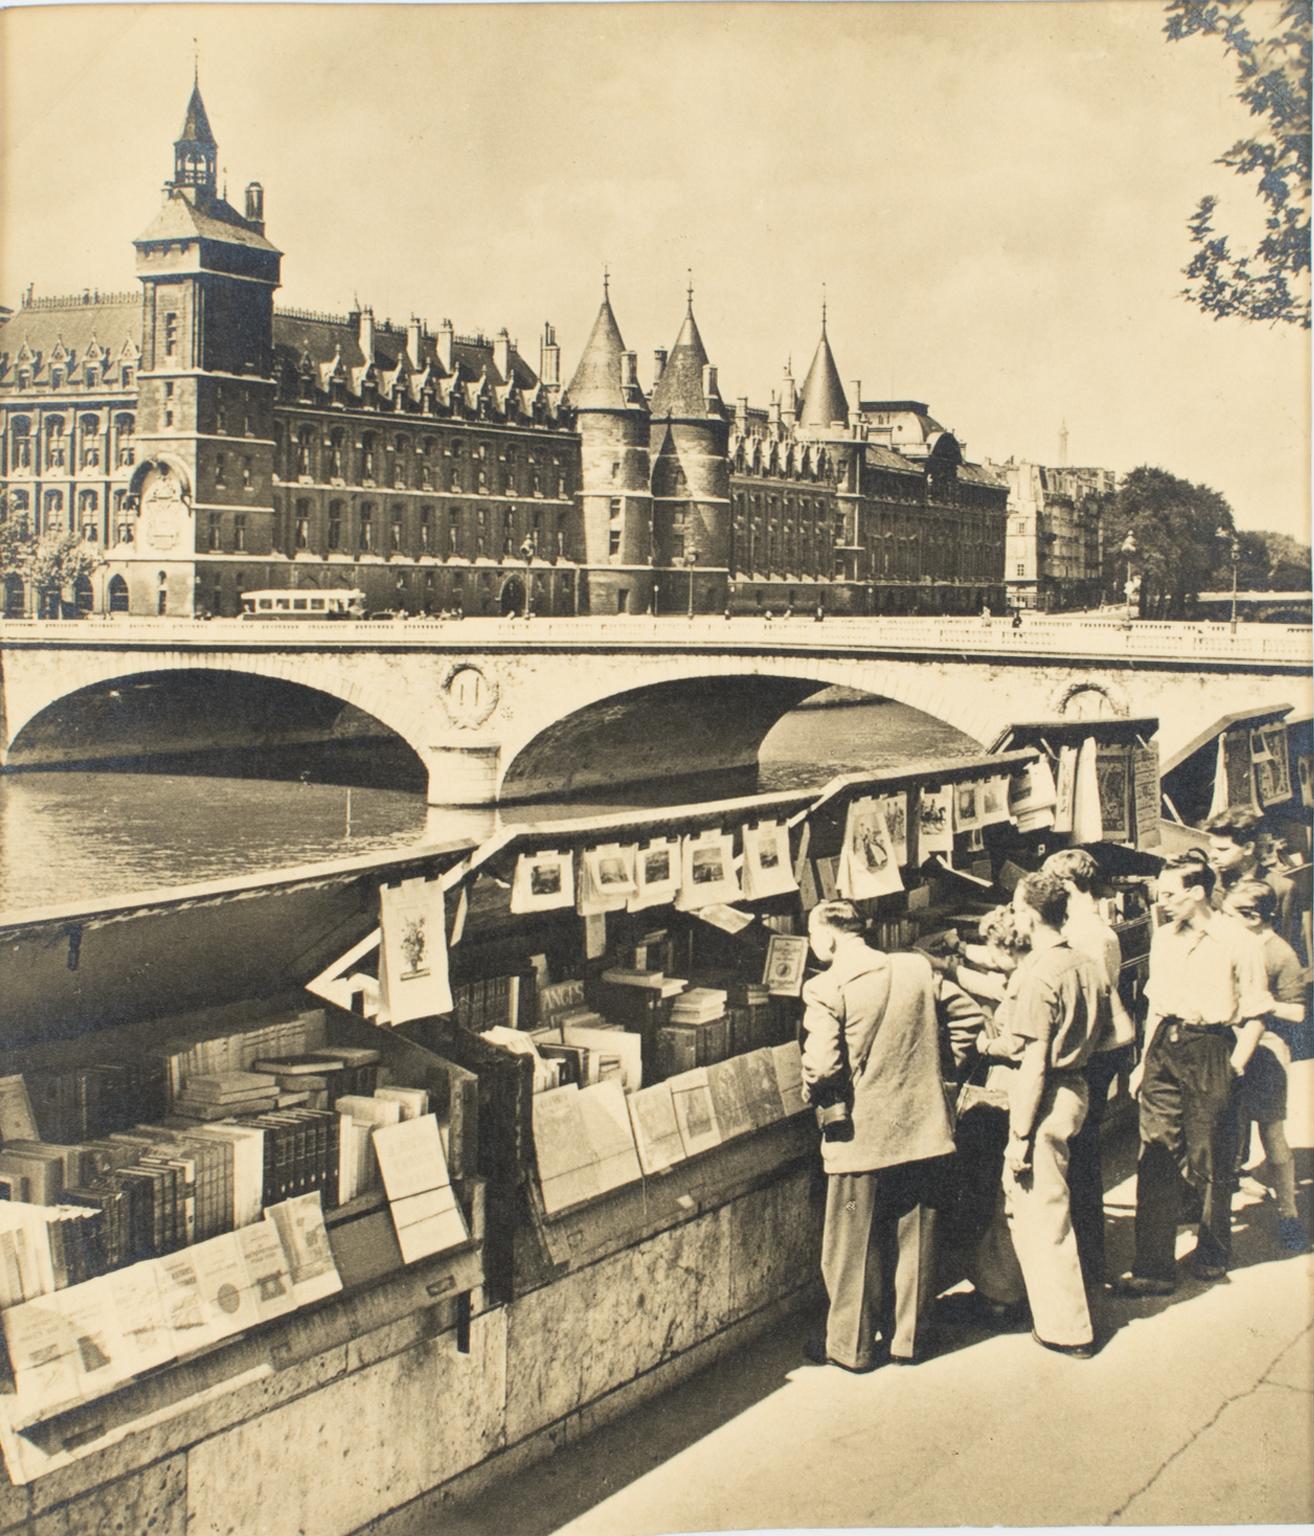 Paris, The Riverbank Booksellers - Black and White Original Photography Postcard